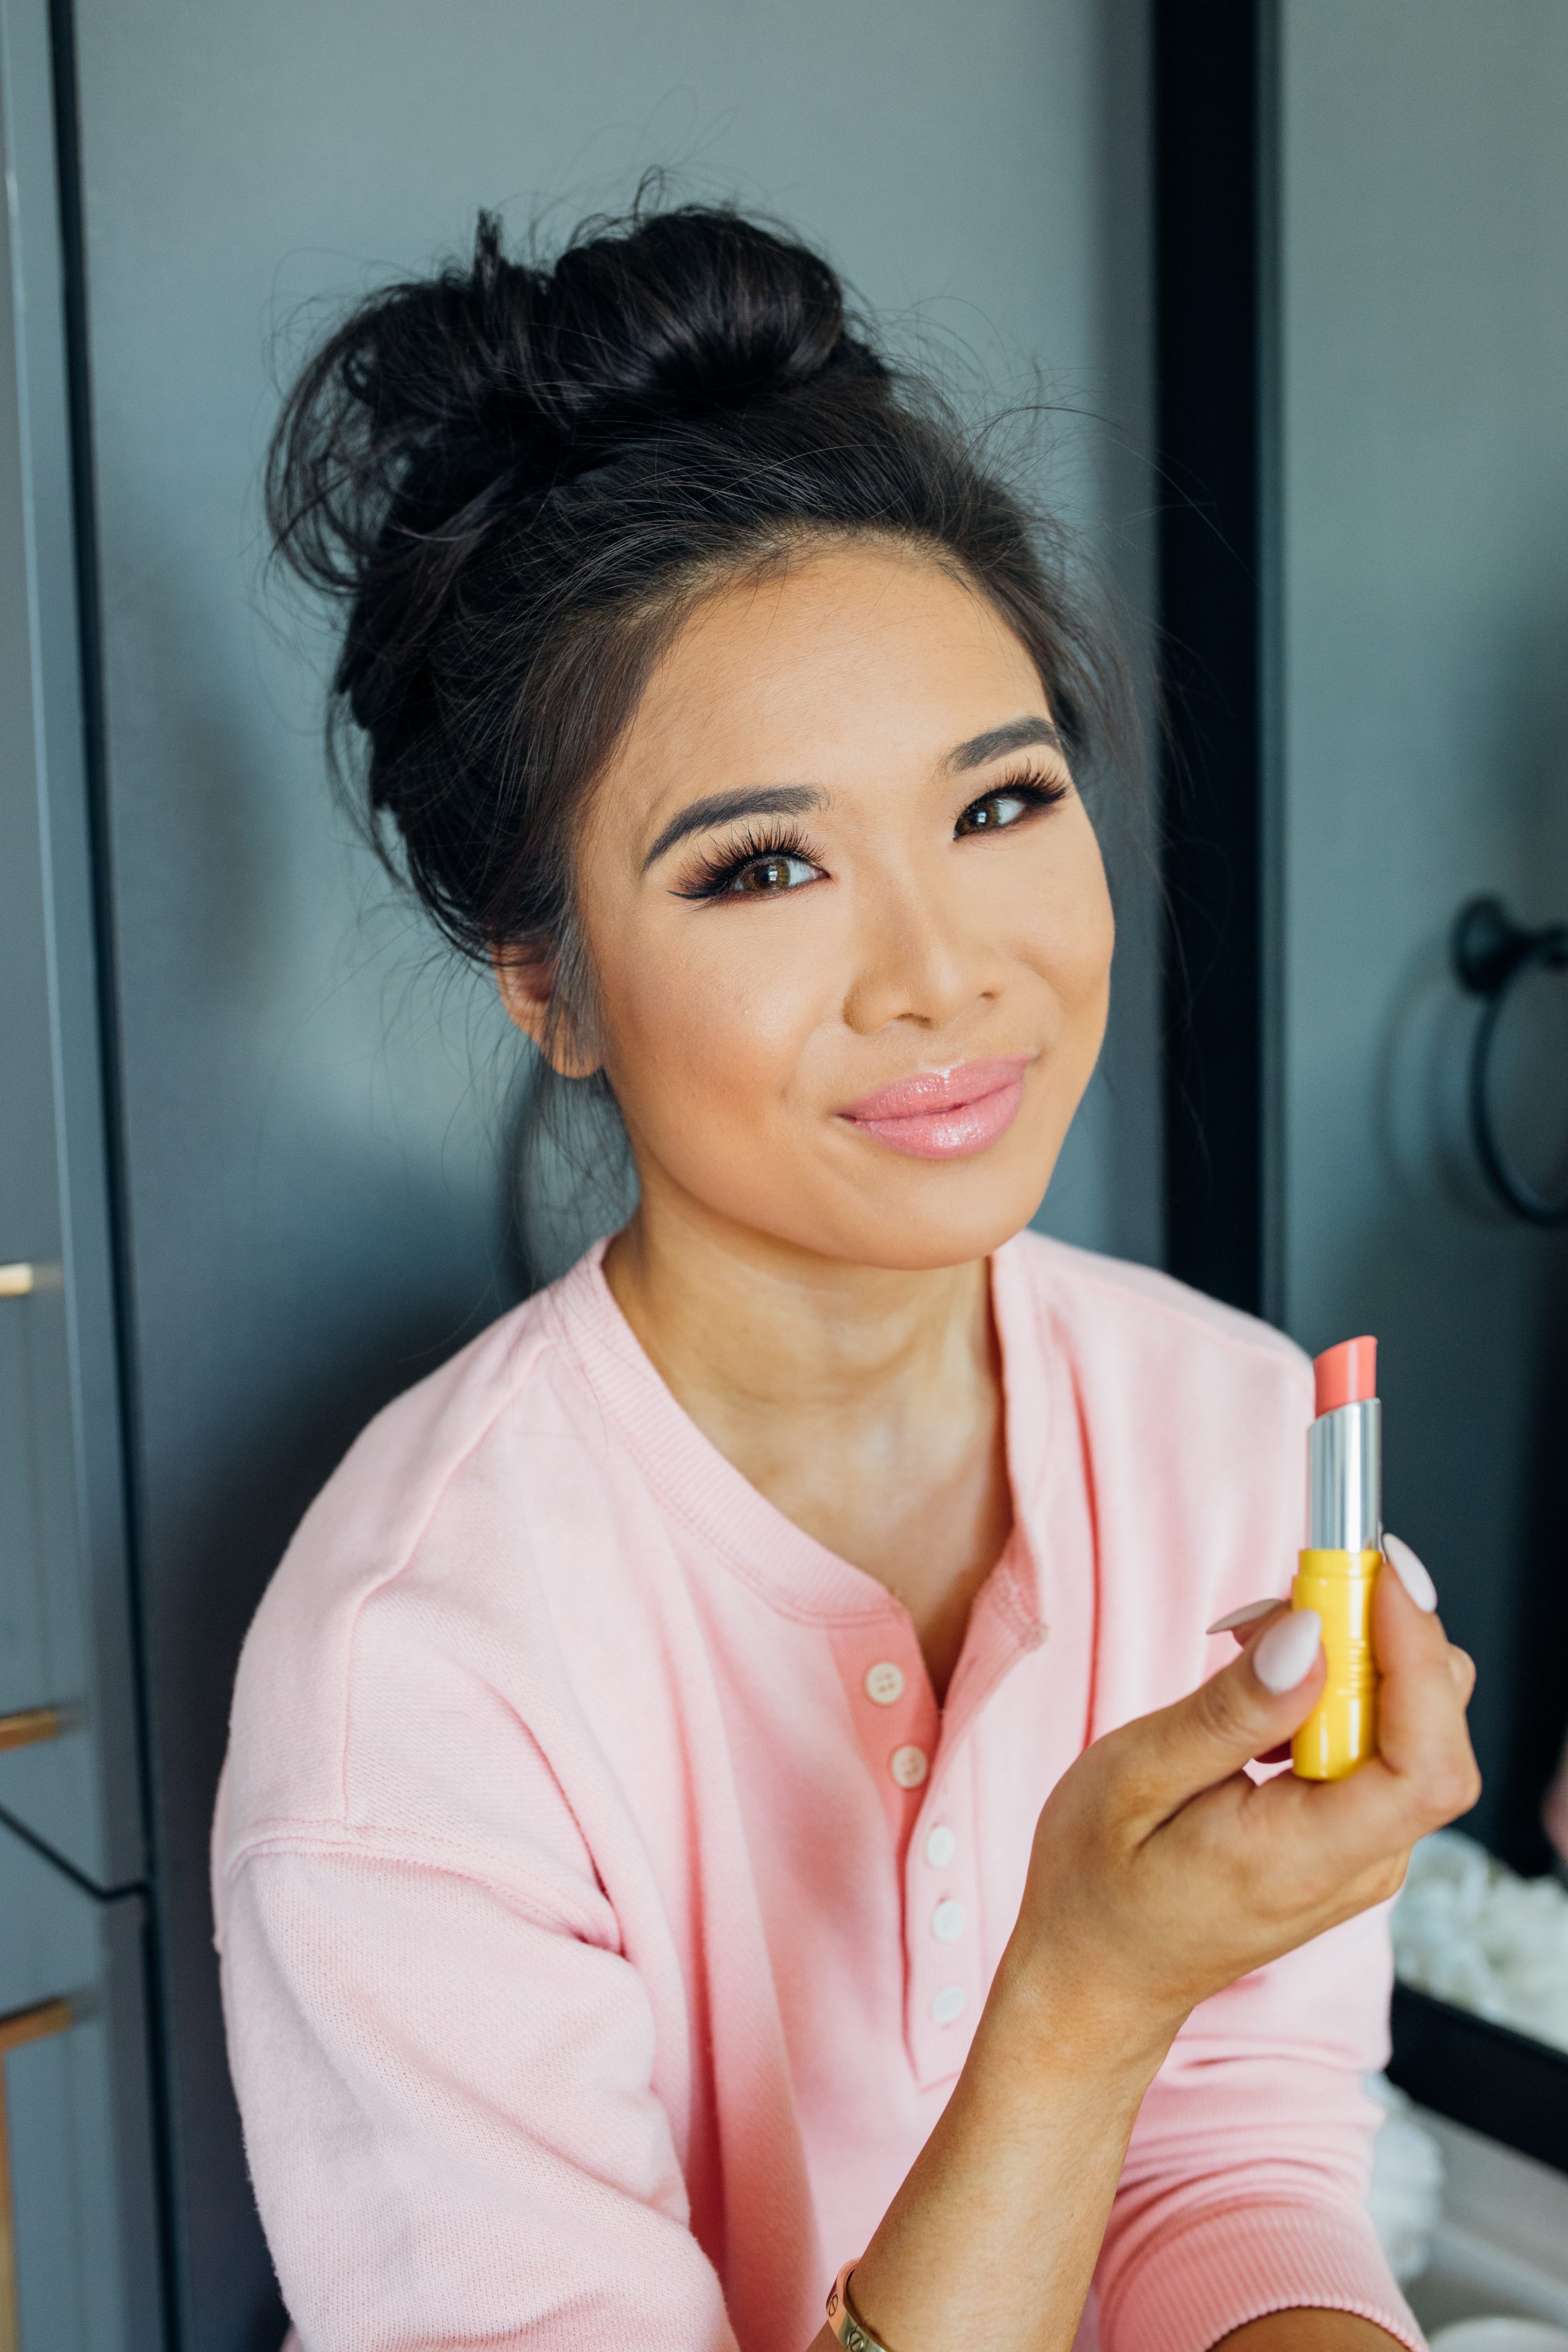 Blogger Hoang-Kim shares her lip care routine with L'Occitane